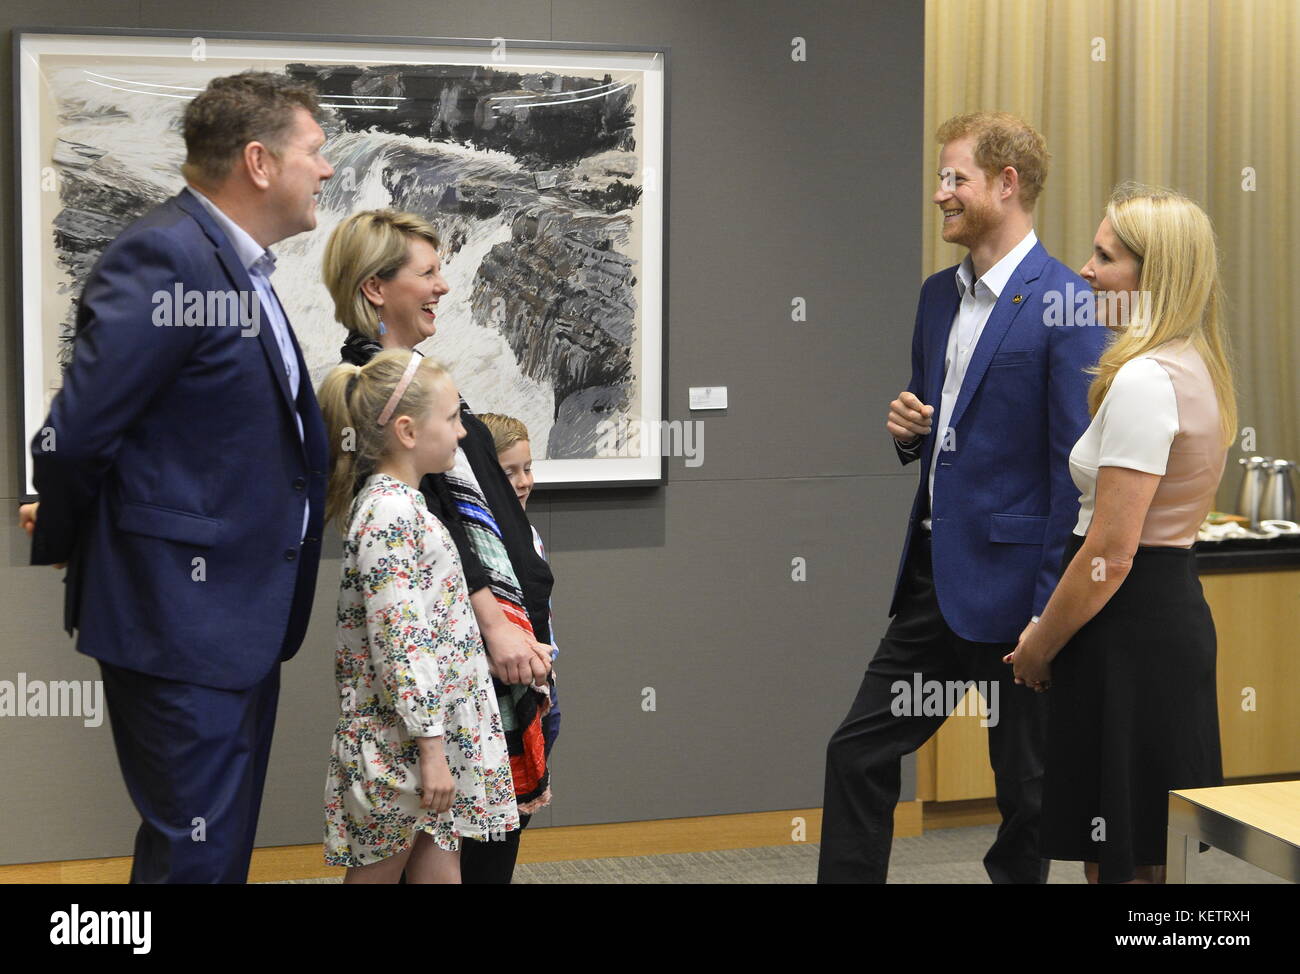 Prince Harry attends the True Patriot Love Symposium at the Scotia Plaza in Toronto  Featuring: Prince Harry Where: Toronto, Canada When: 22 Sep 2017 Credit: Euan Cherry/WENN.com Stock Photo